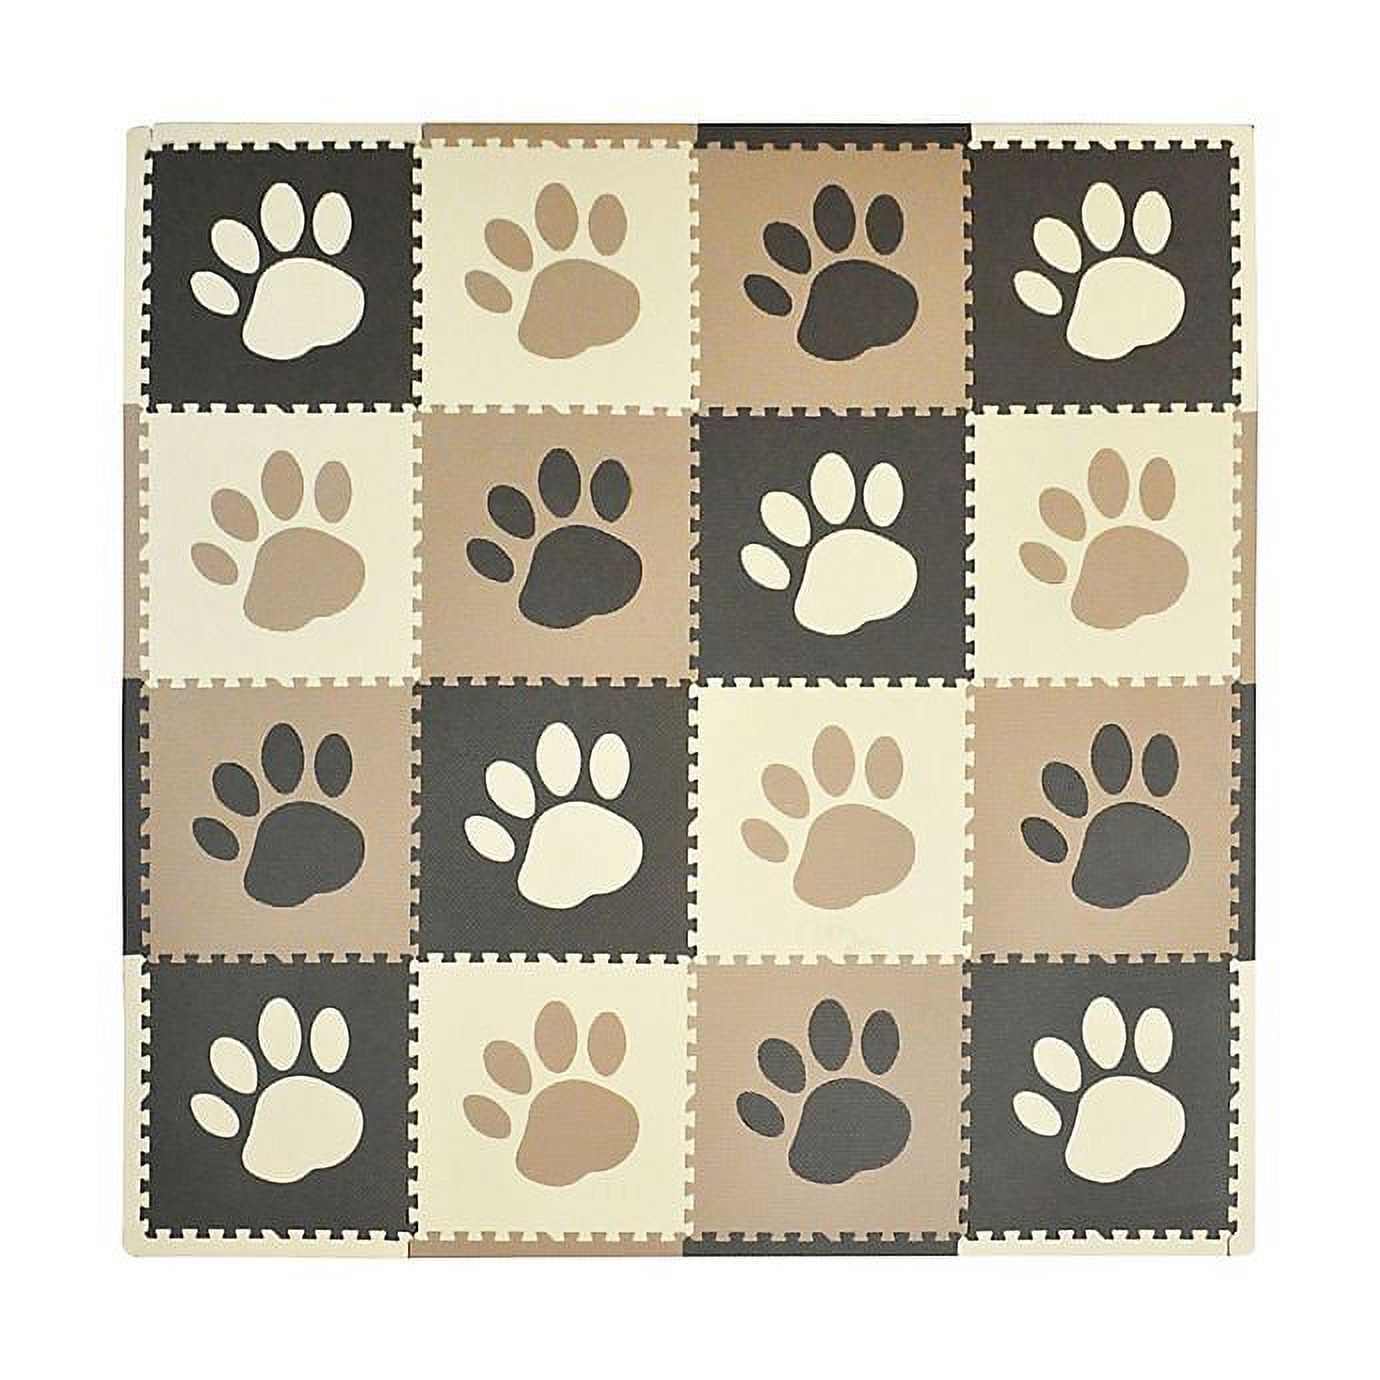 Tadpoles by Sleeping Partners Paw Print Play Mat in Taupe/Brown - image 1 of 2